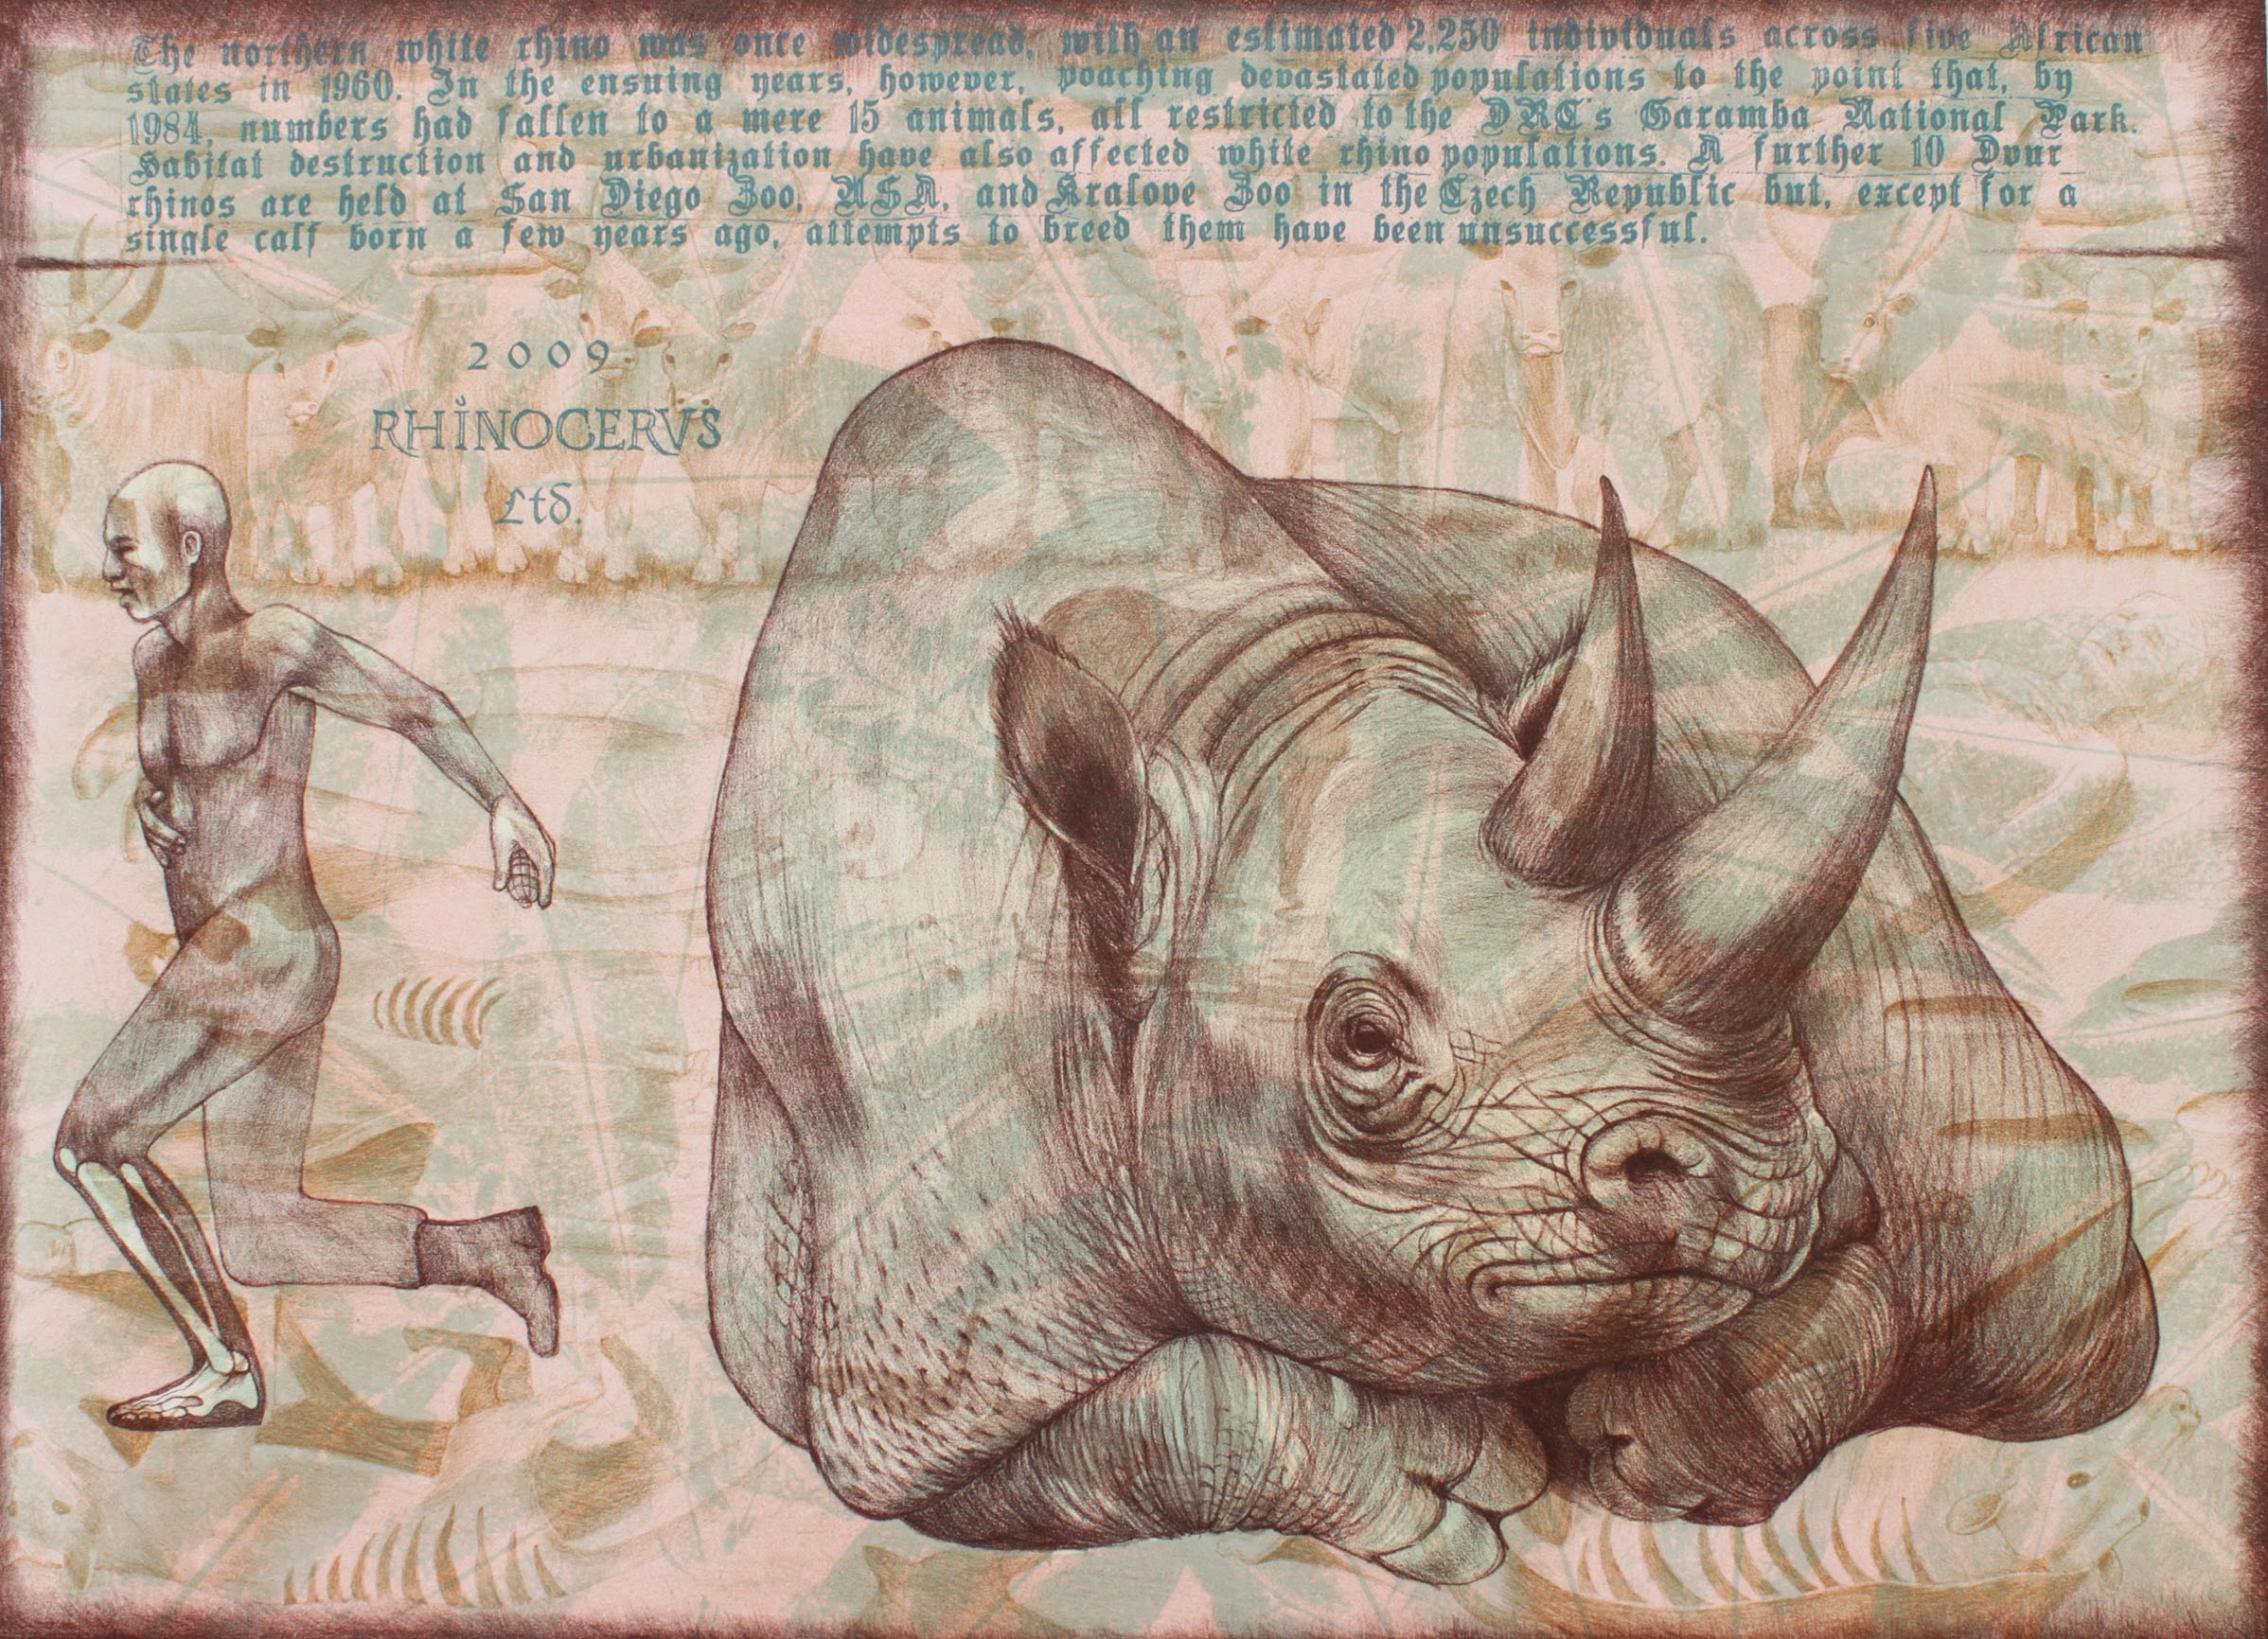 A white rhino lays in the foreground accompanied by a running human figure flayed in places to resemble an anatomical drawing. Text, in a typeface alluding to Dürer's Rhinoceros (1515) discusses the plight of the white rhino in the modern age